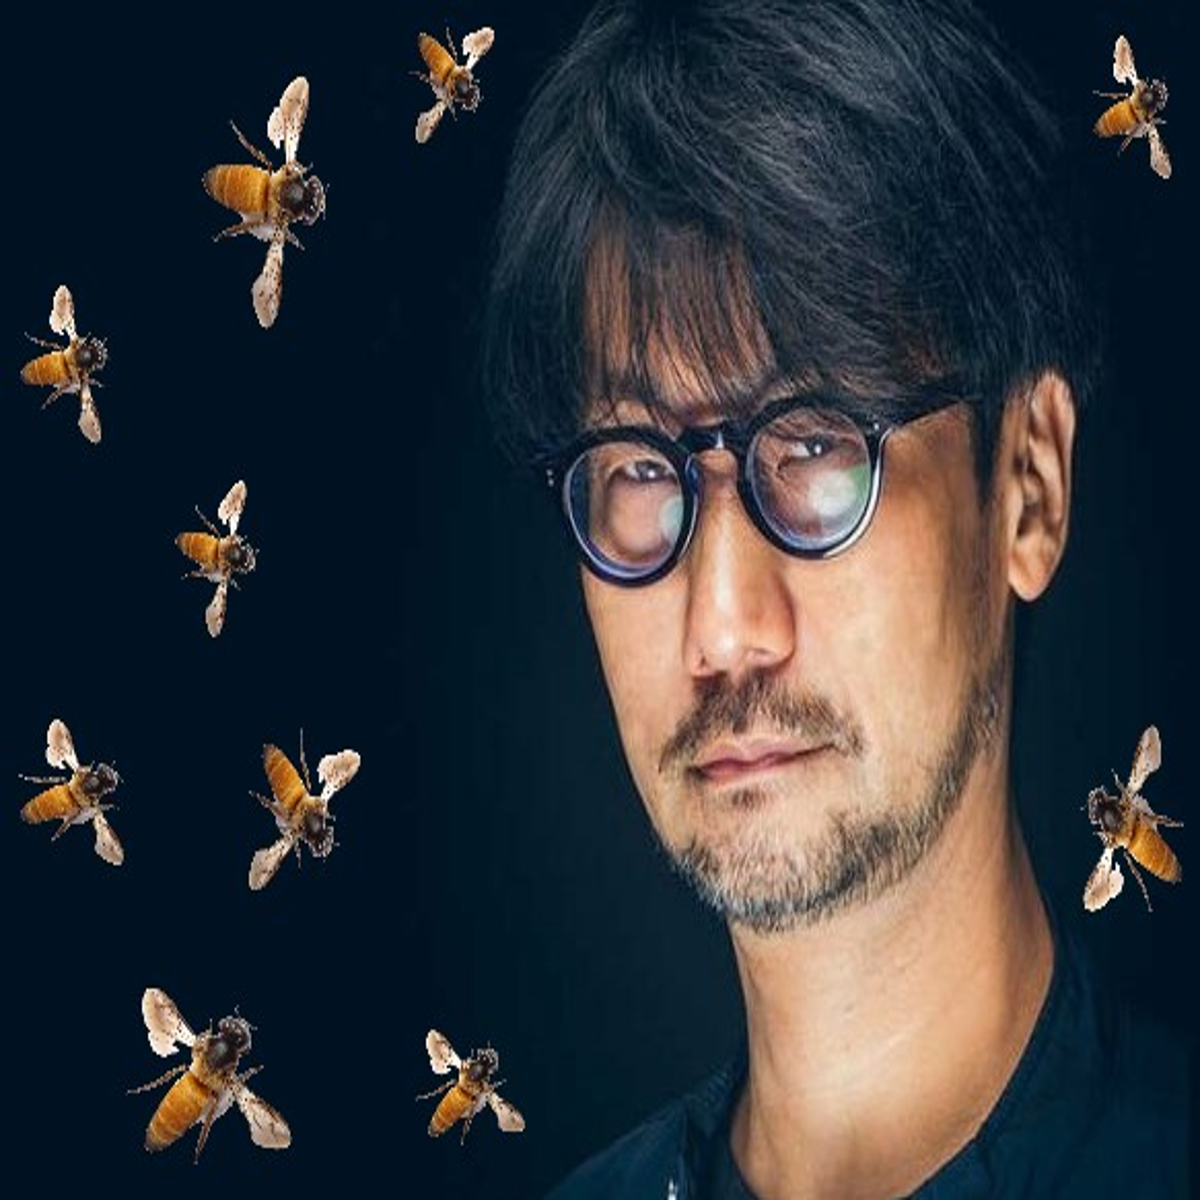 Hideo Kojima was stung by at least 10 bees all at once before